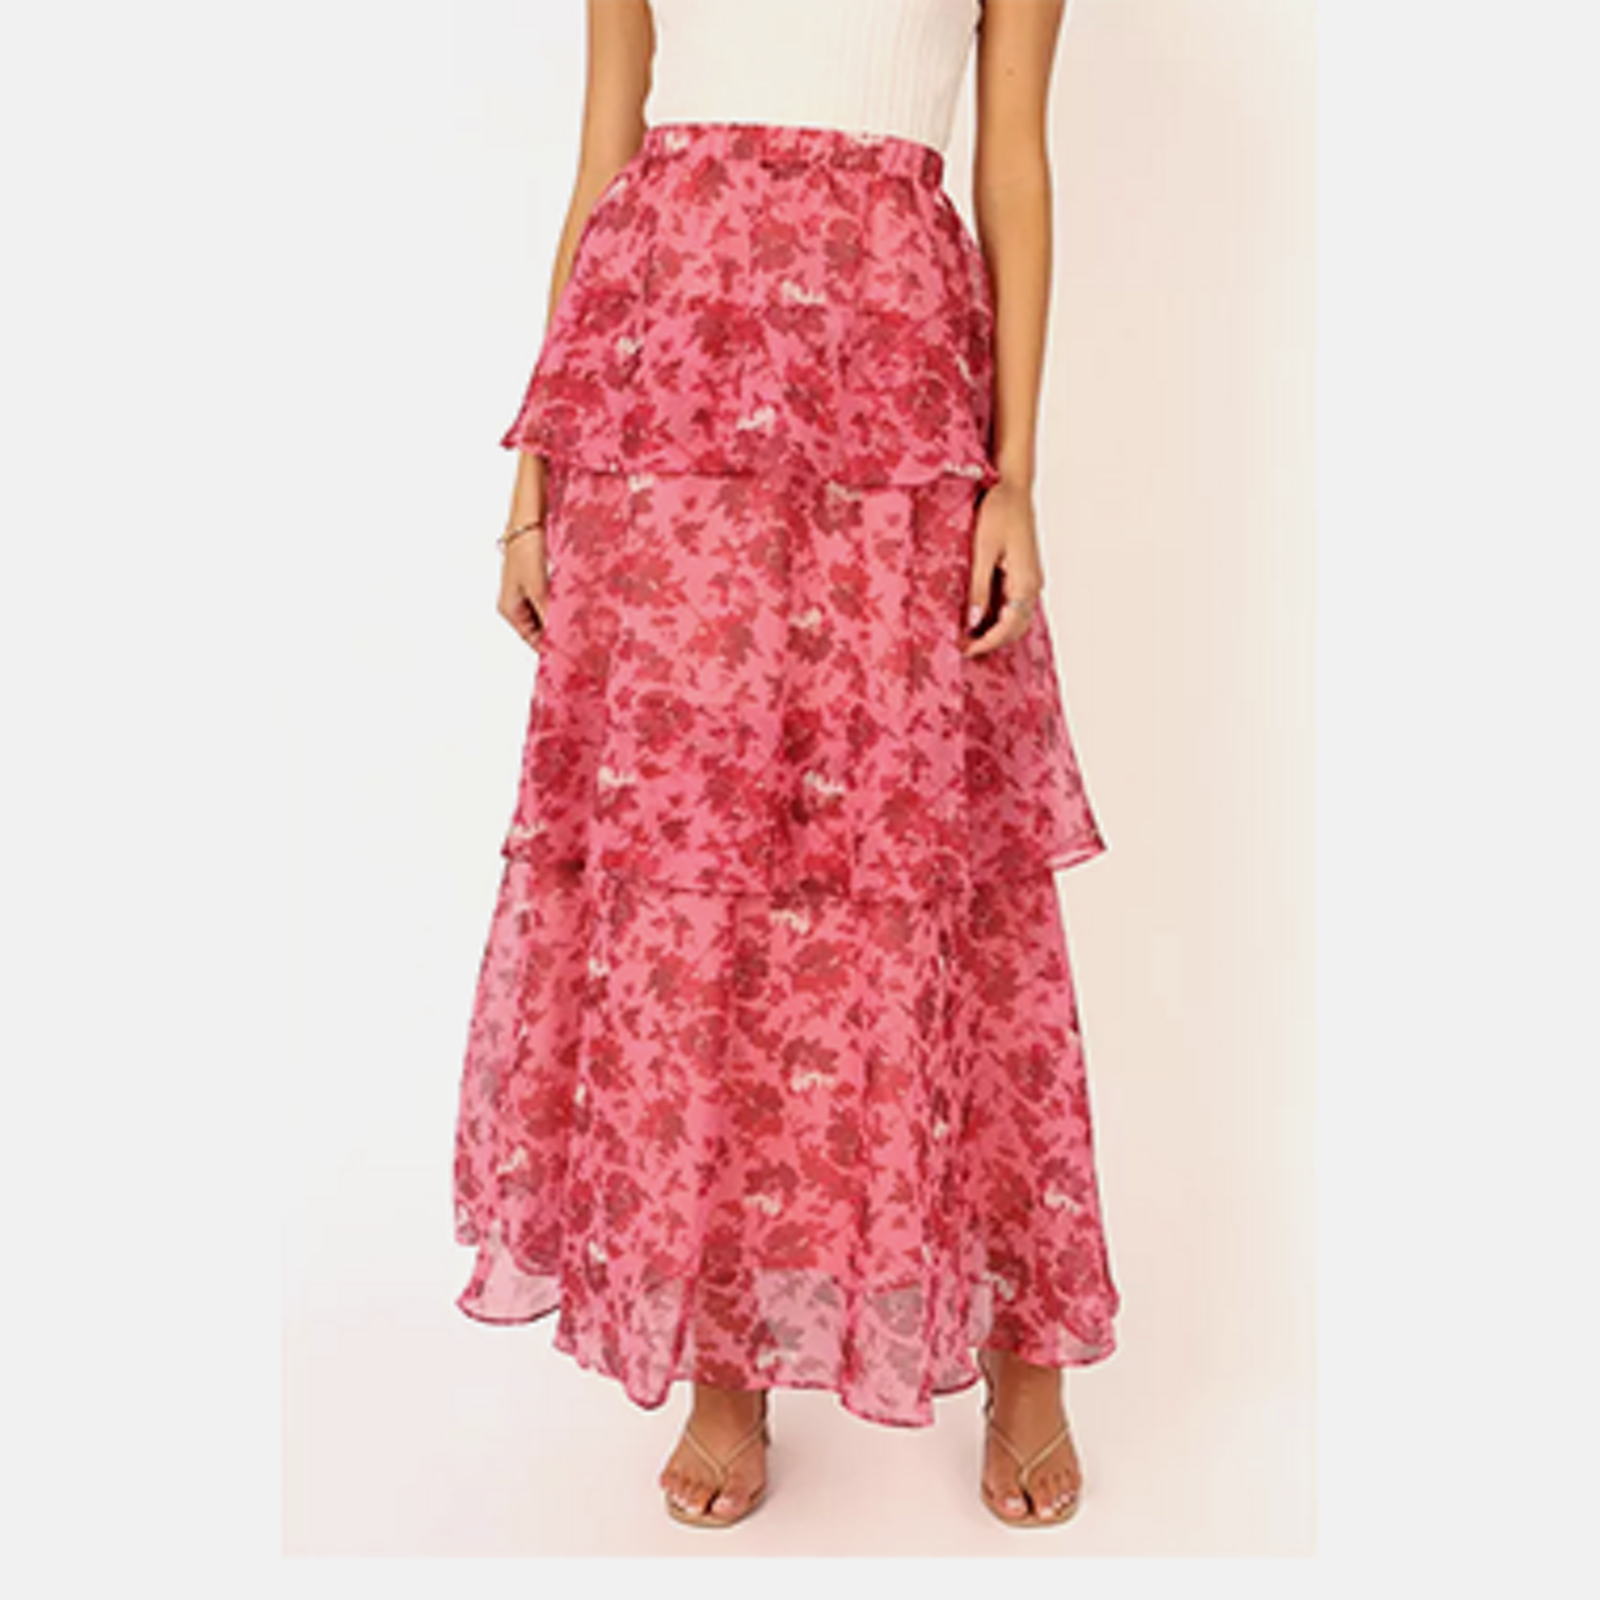 Calvin Klein Girls 3 Pieces Floral Skirt and Tops Set, Pink Floral 5 